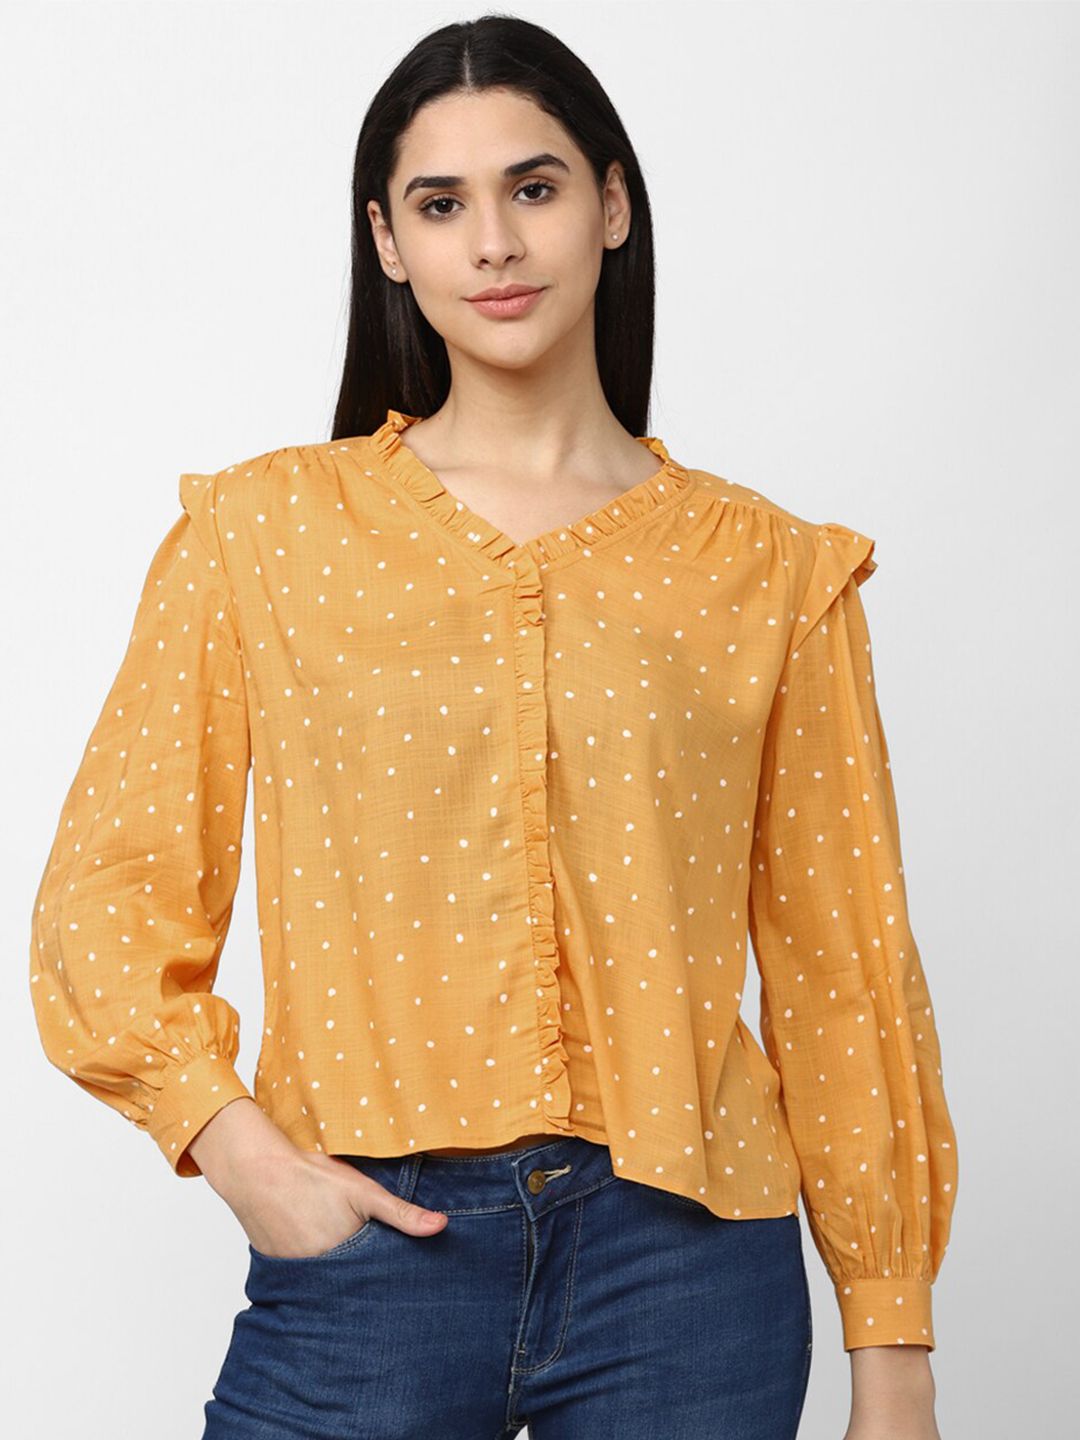 Van Heusen Cuffed sleeved Shirt Style Top Price in India